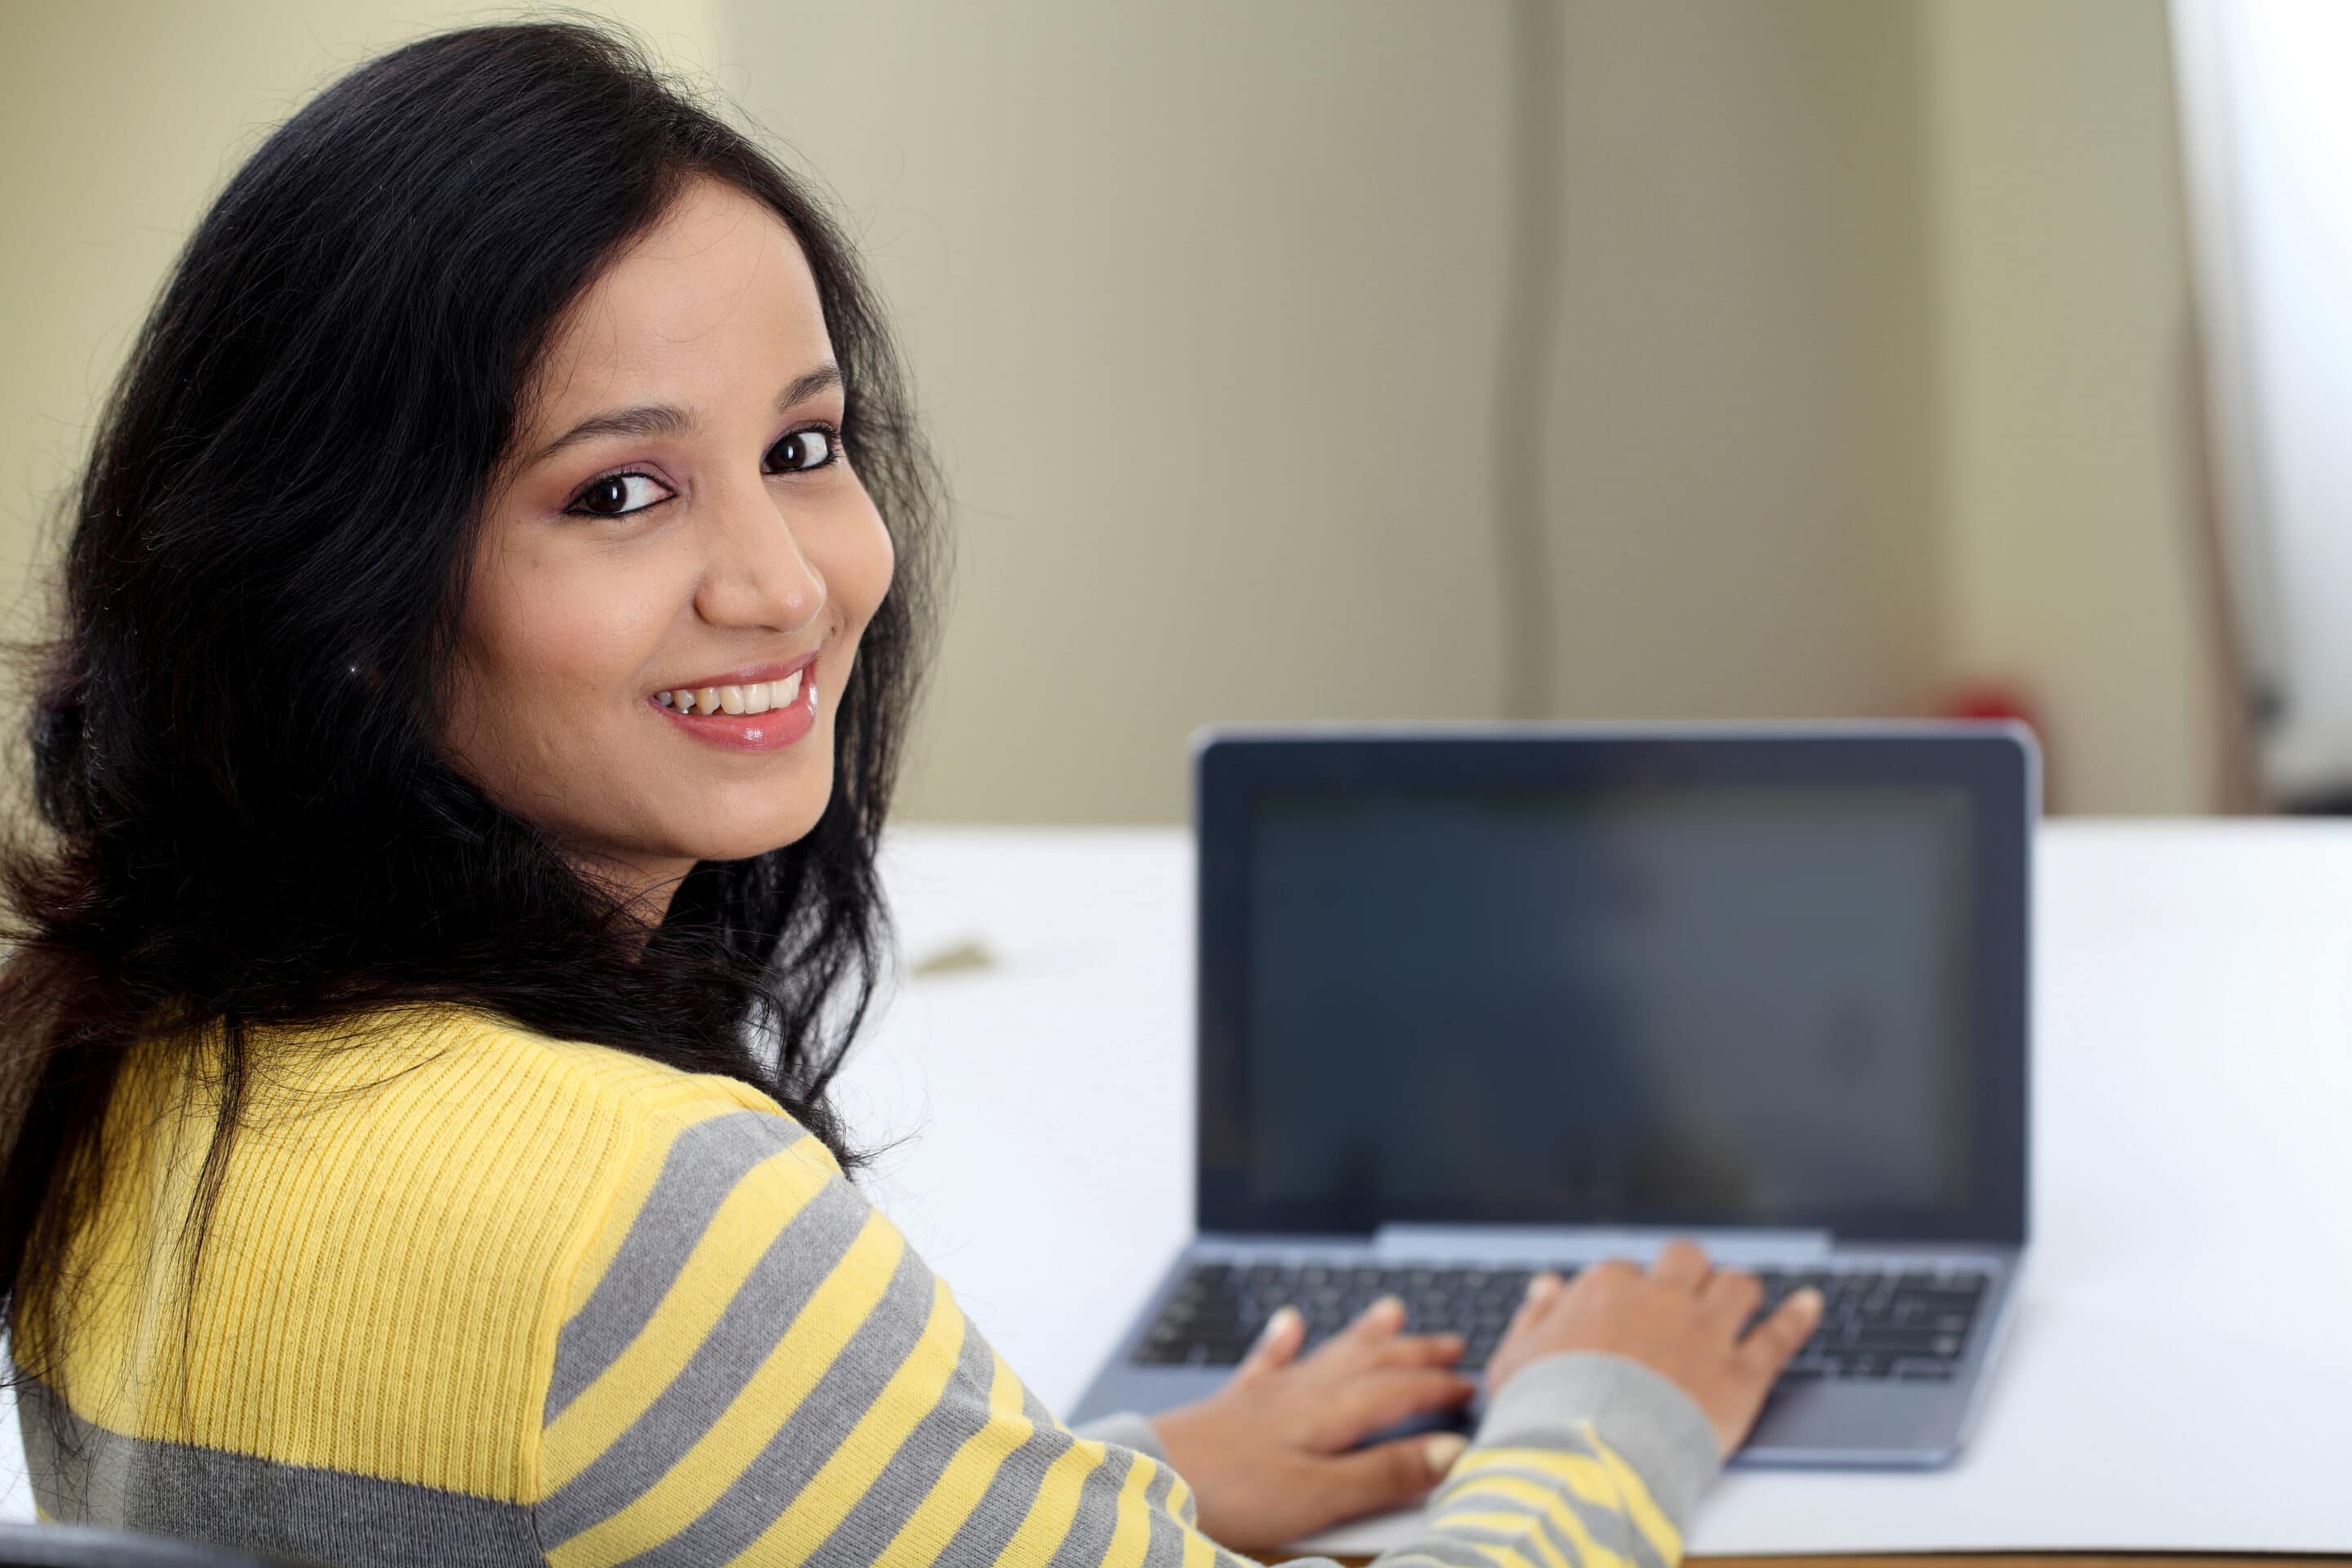 Girl smiling by computer